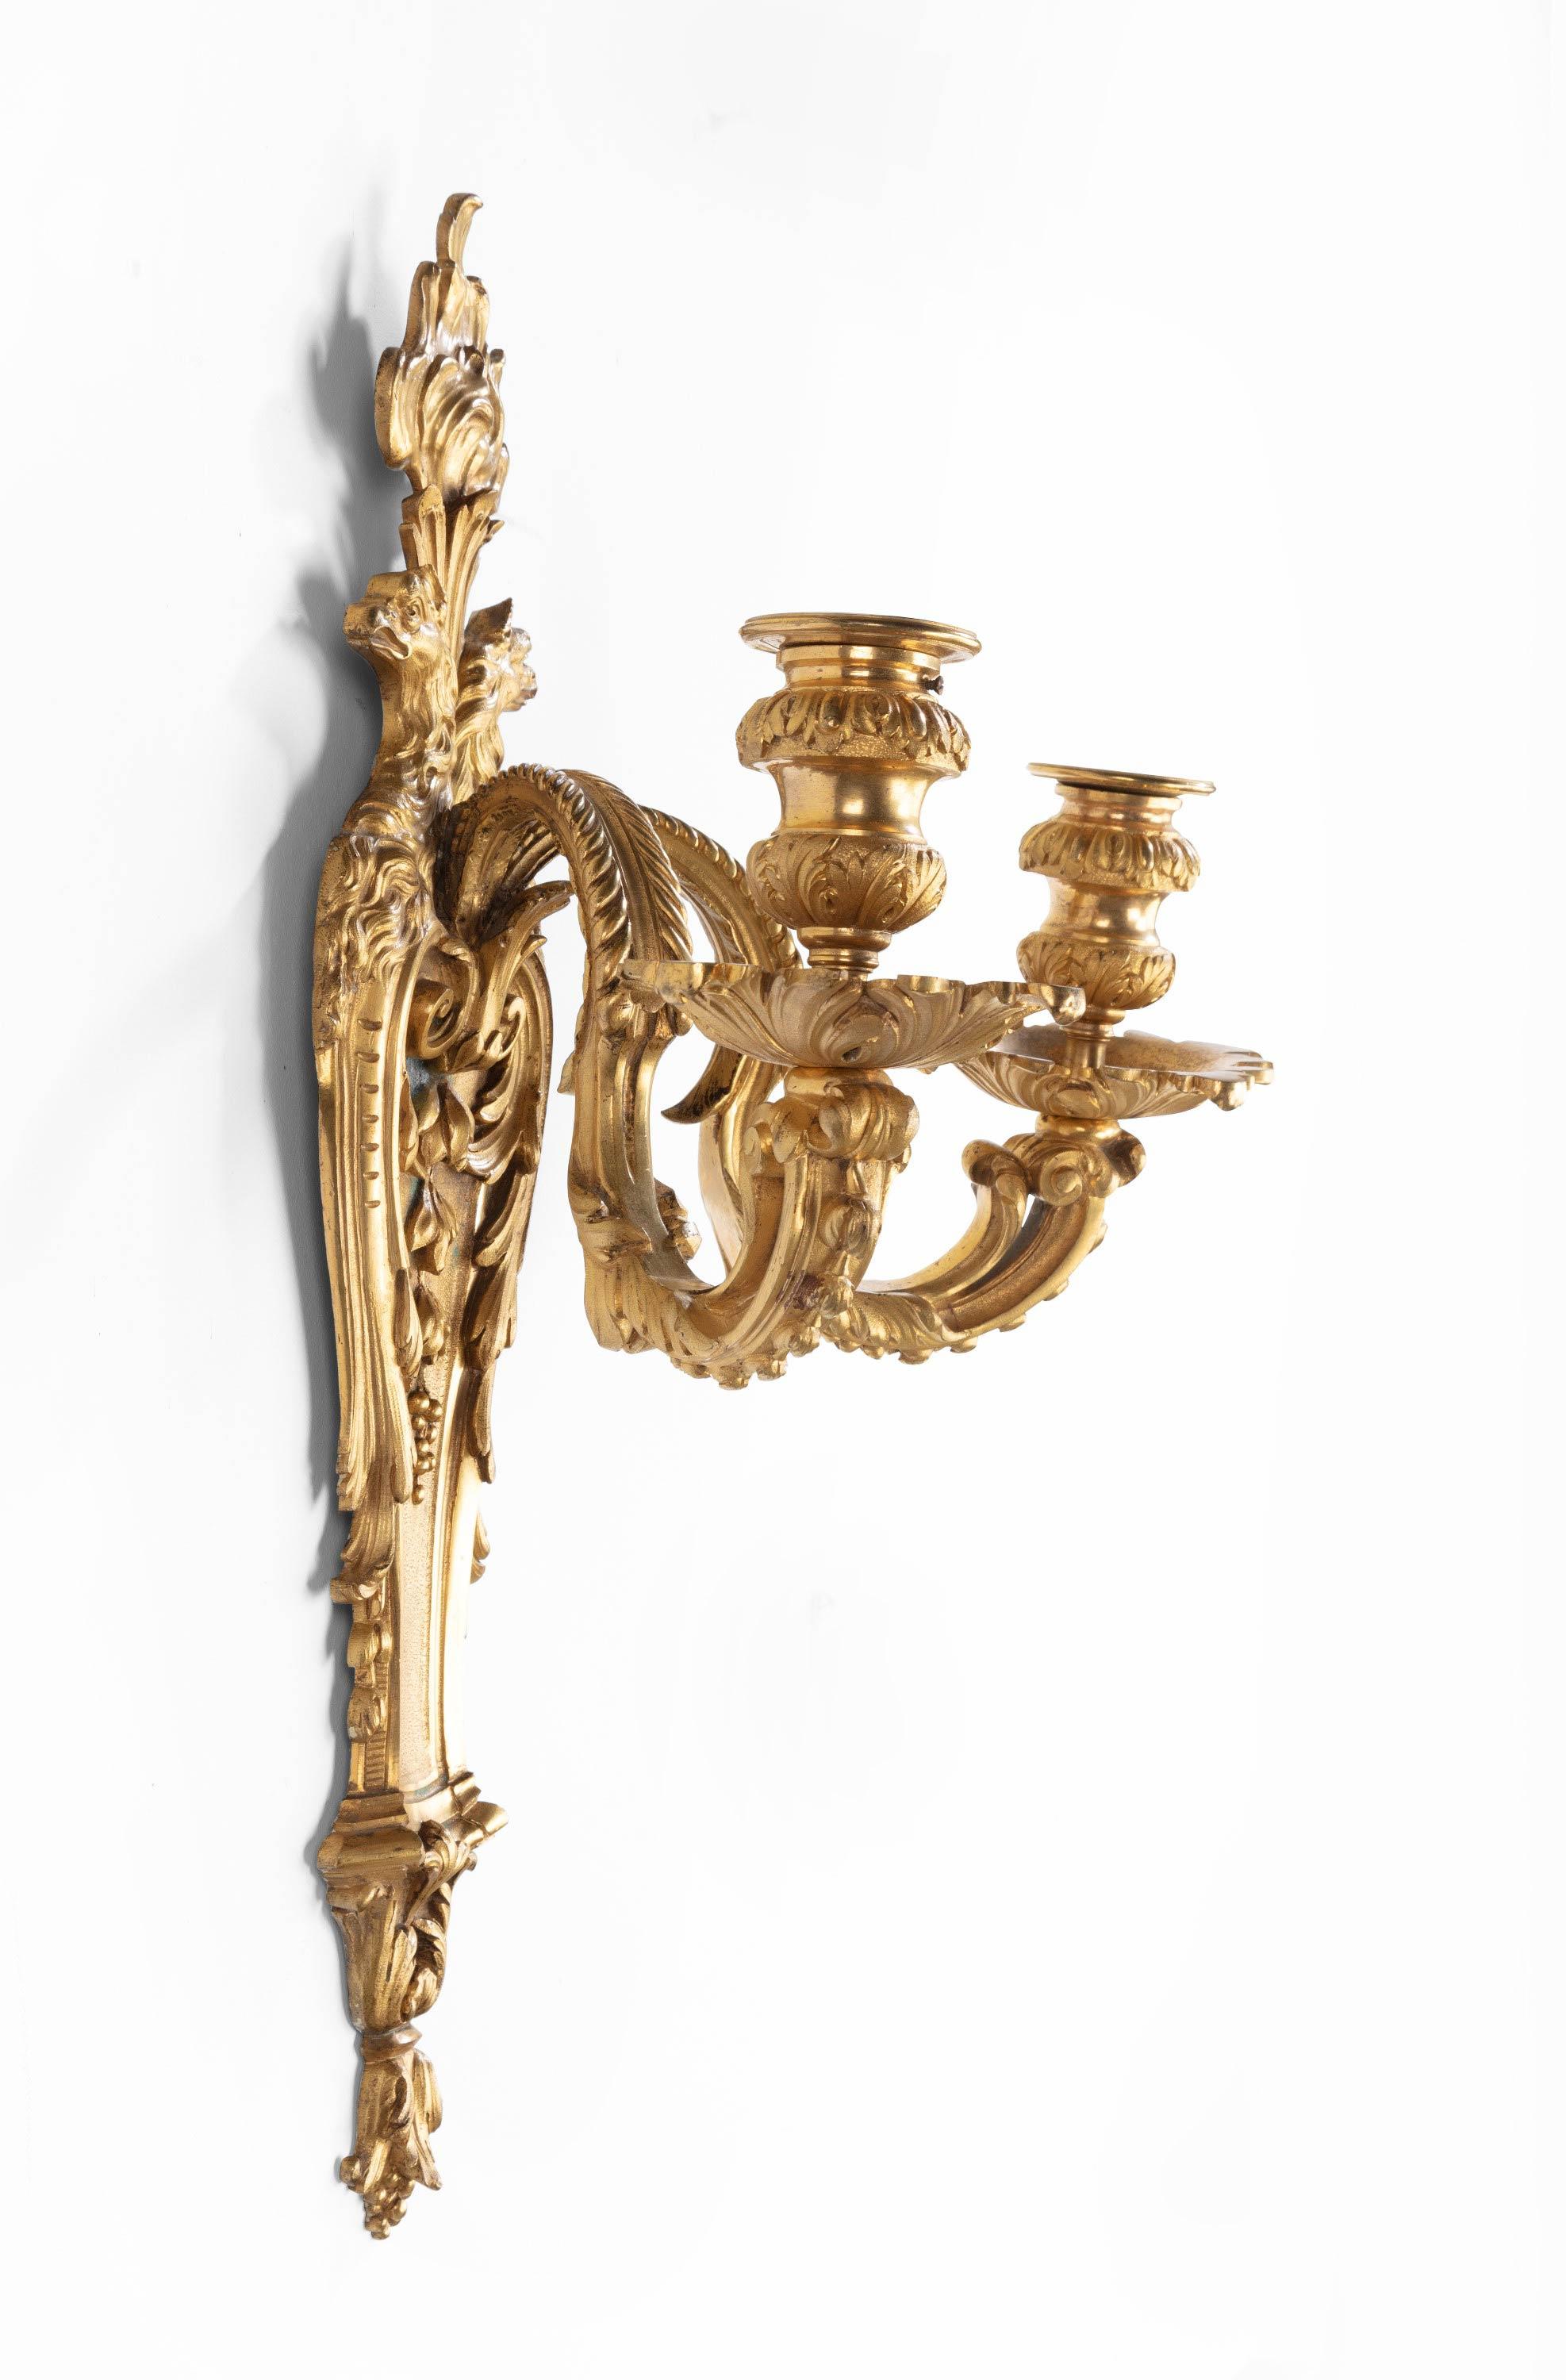 Outstanding Pair or Ormolu Wall Lights In Good Condition For Sale In Peterborough, Northamptonshire